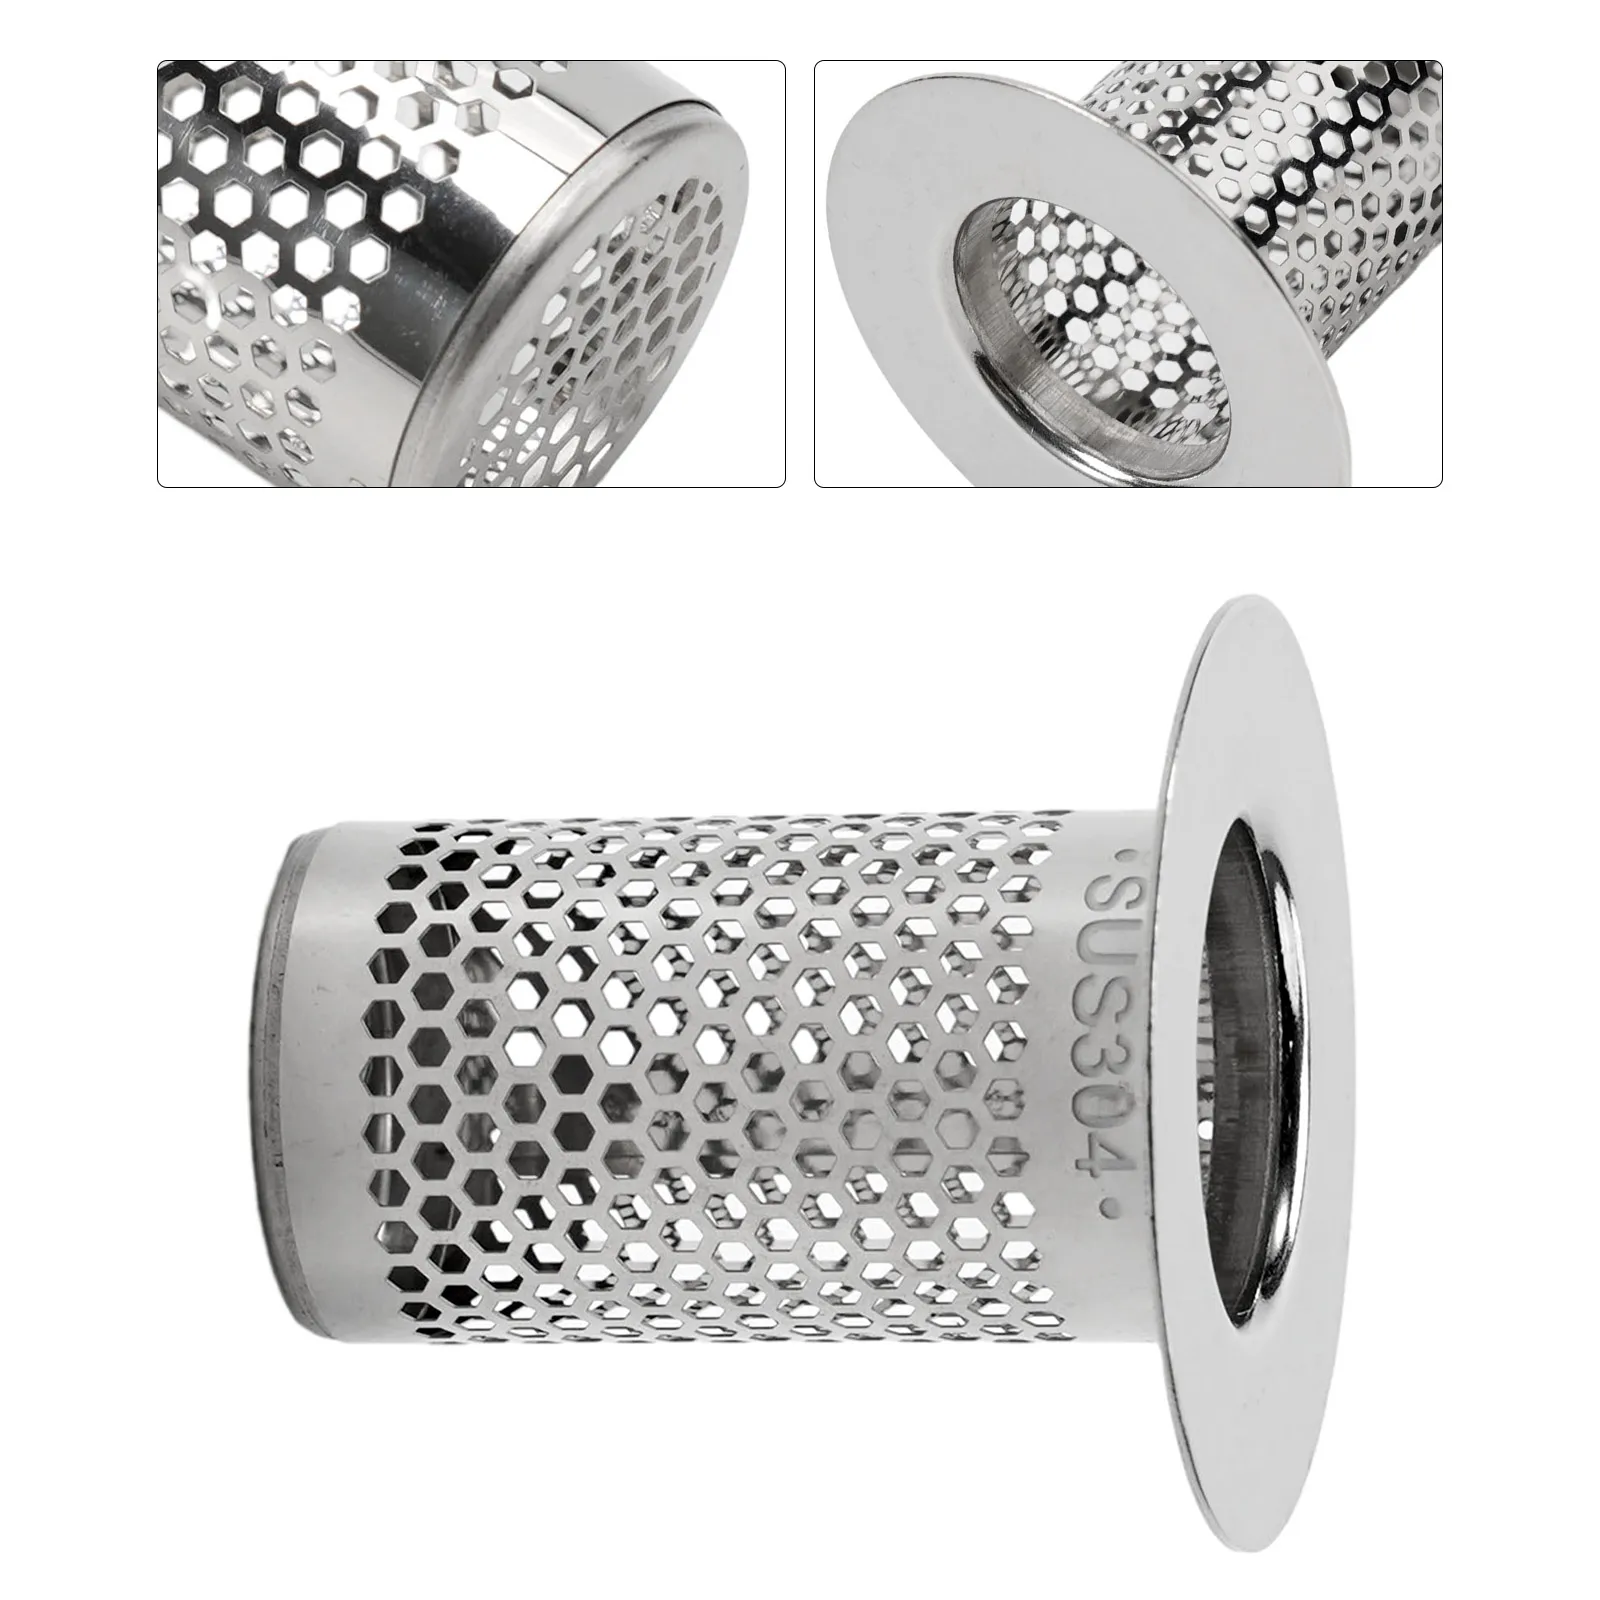 Brand New Drain Strainer Sink Filter Hair Catcher Kitchen Replacement Rust Resistant Stainless Steel Stopper Basket Waste Plug